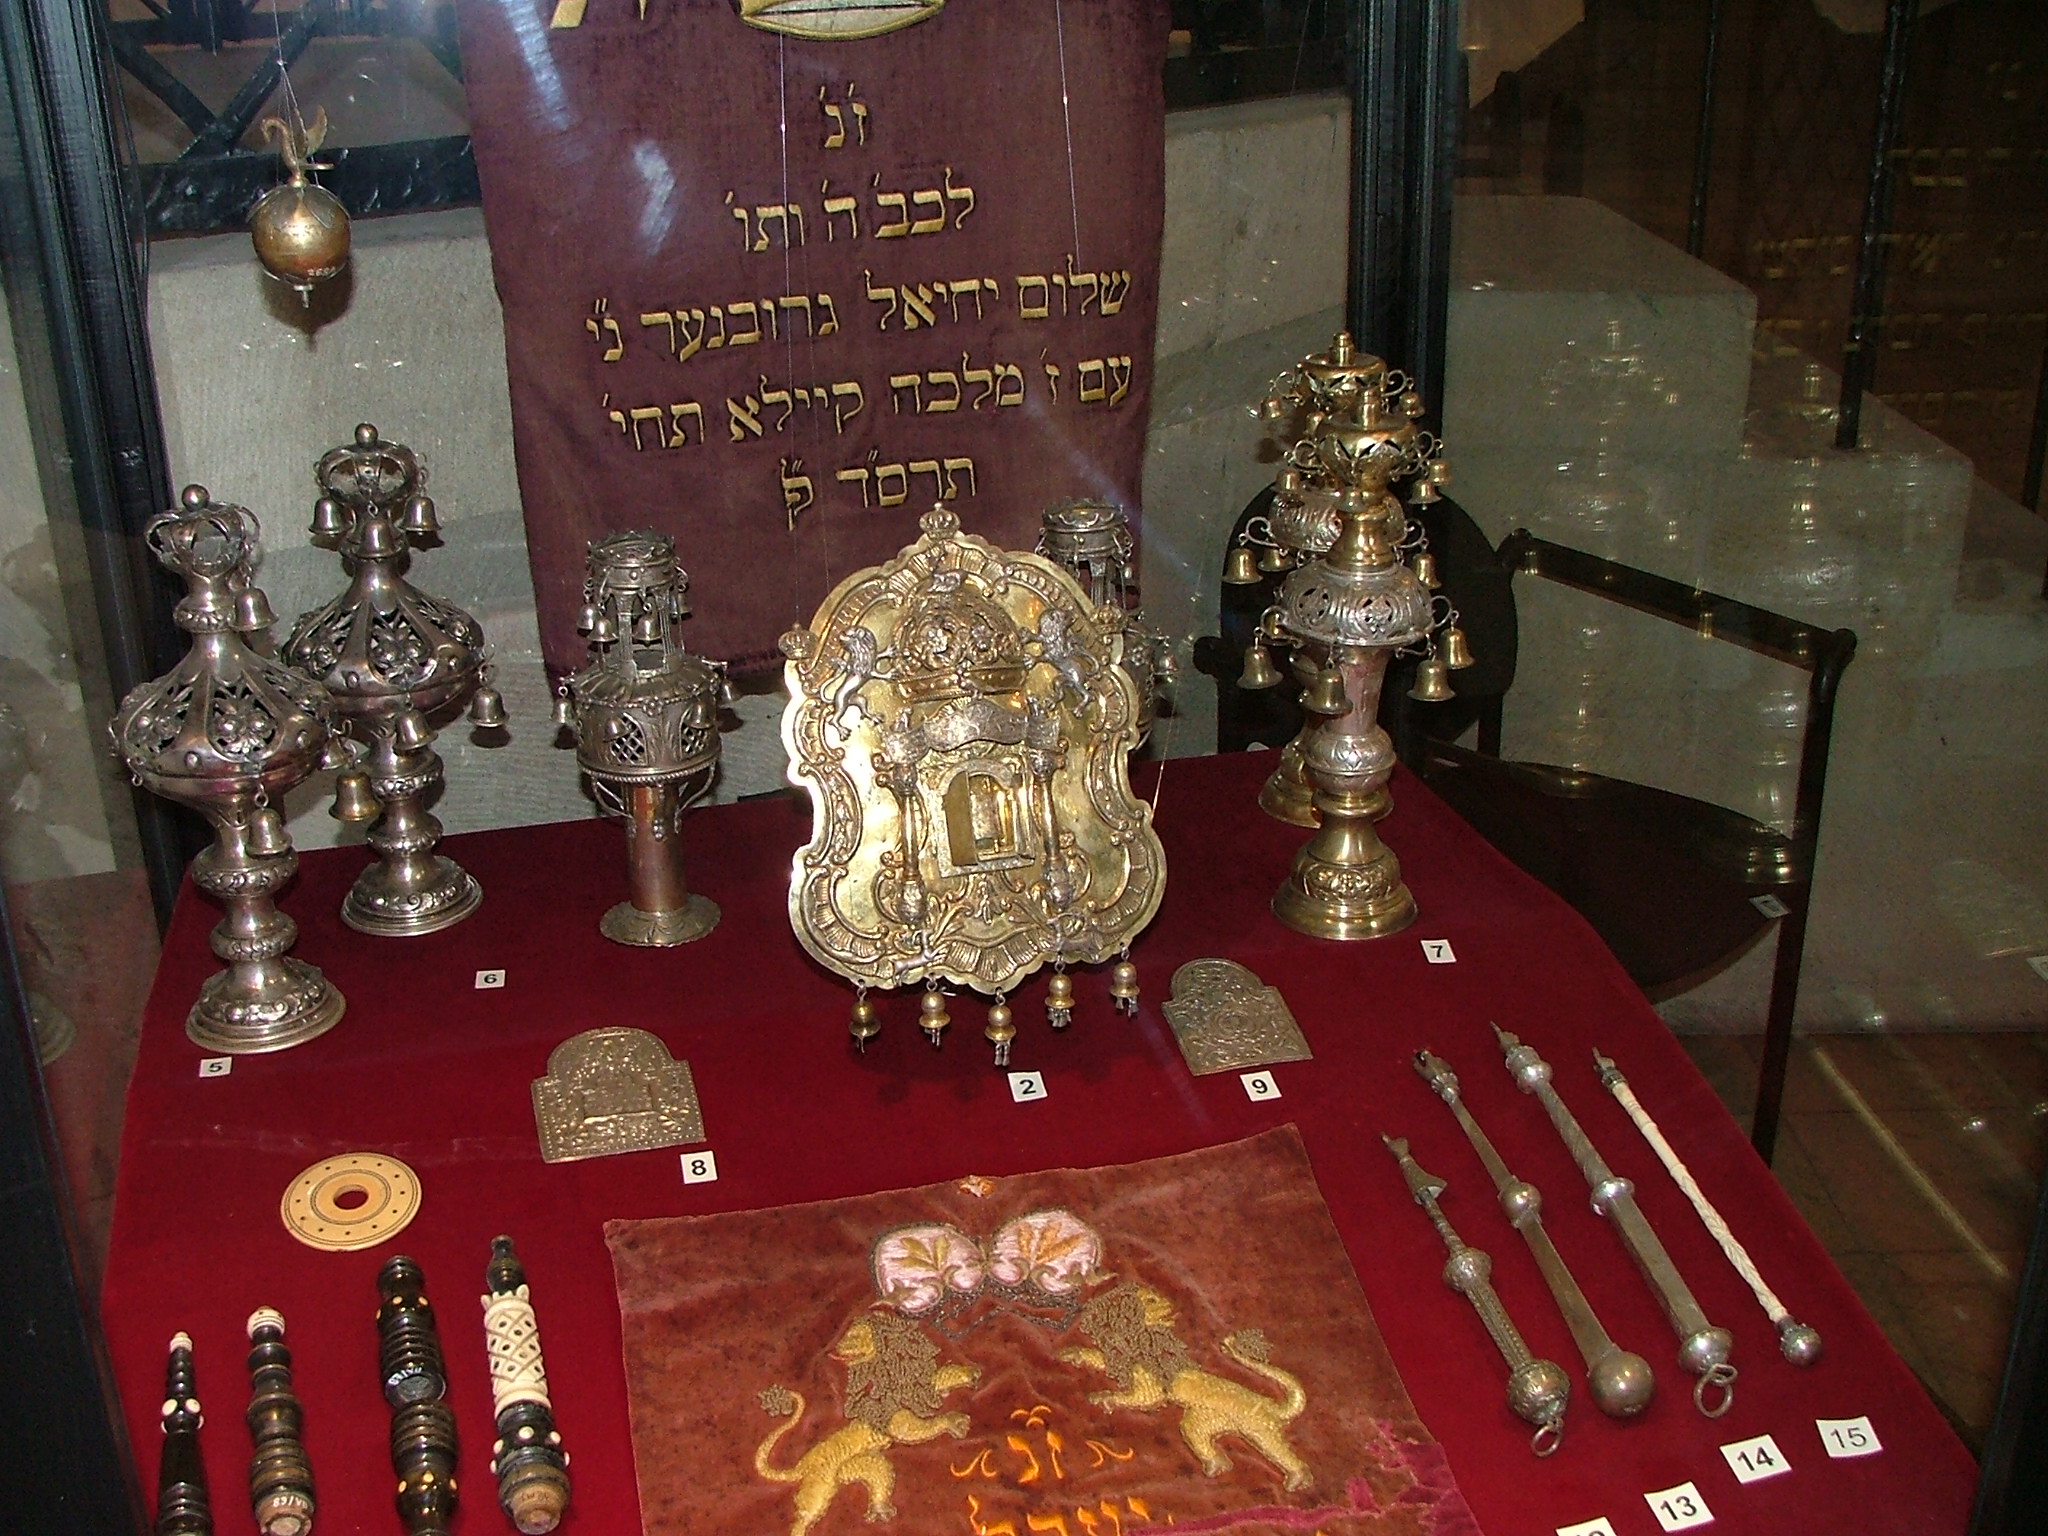 a table covered with various old items and writing